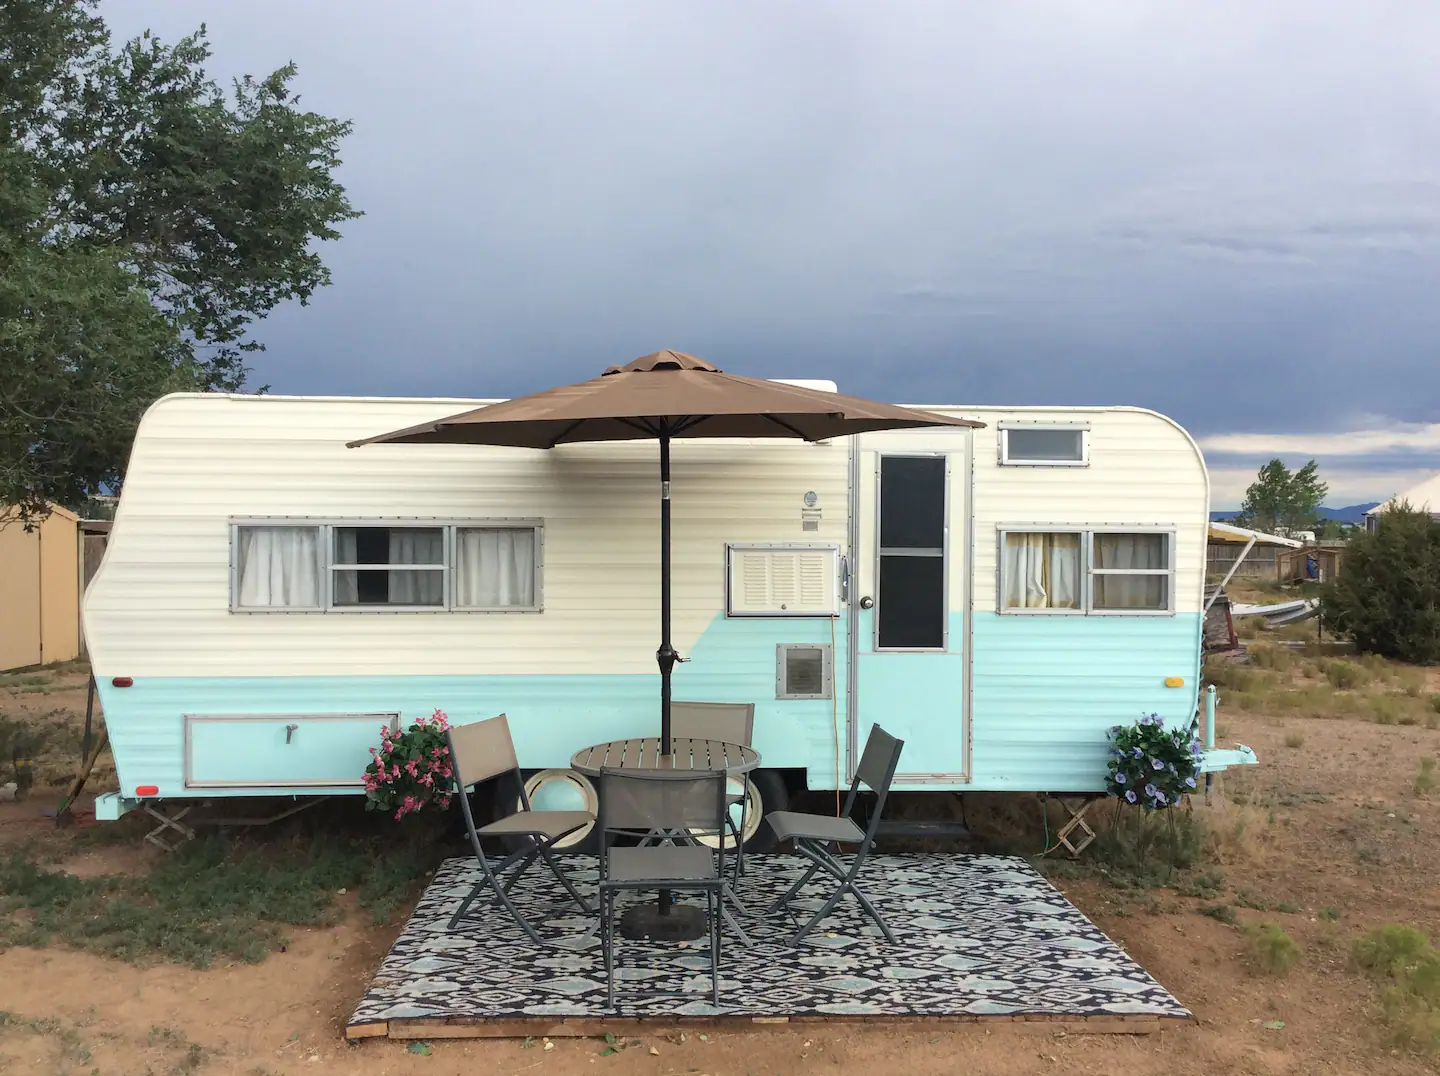 Turquoise Trail-er Glamping in New Mexico